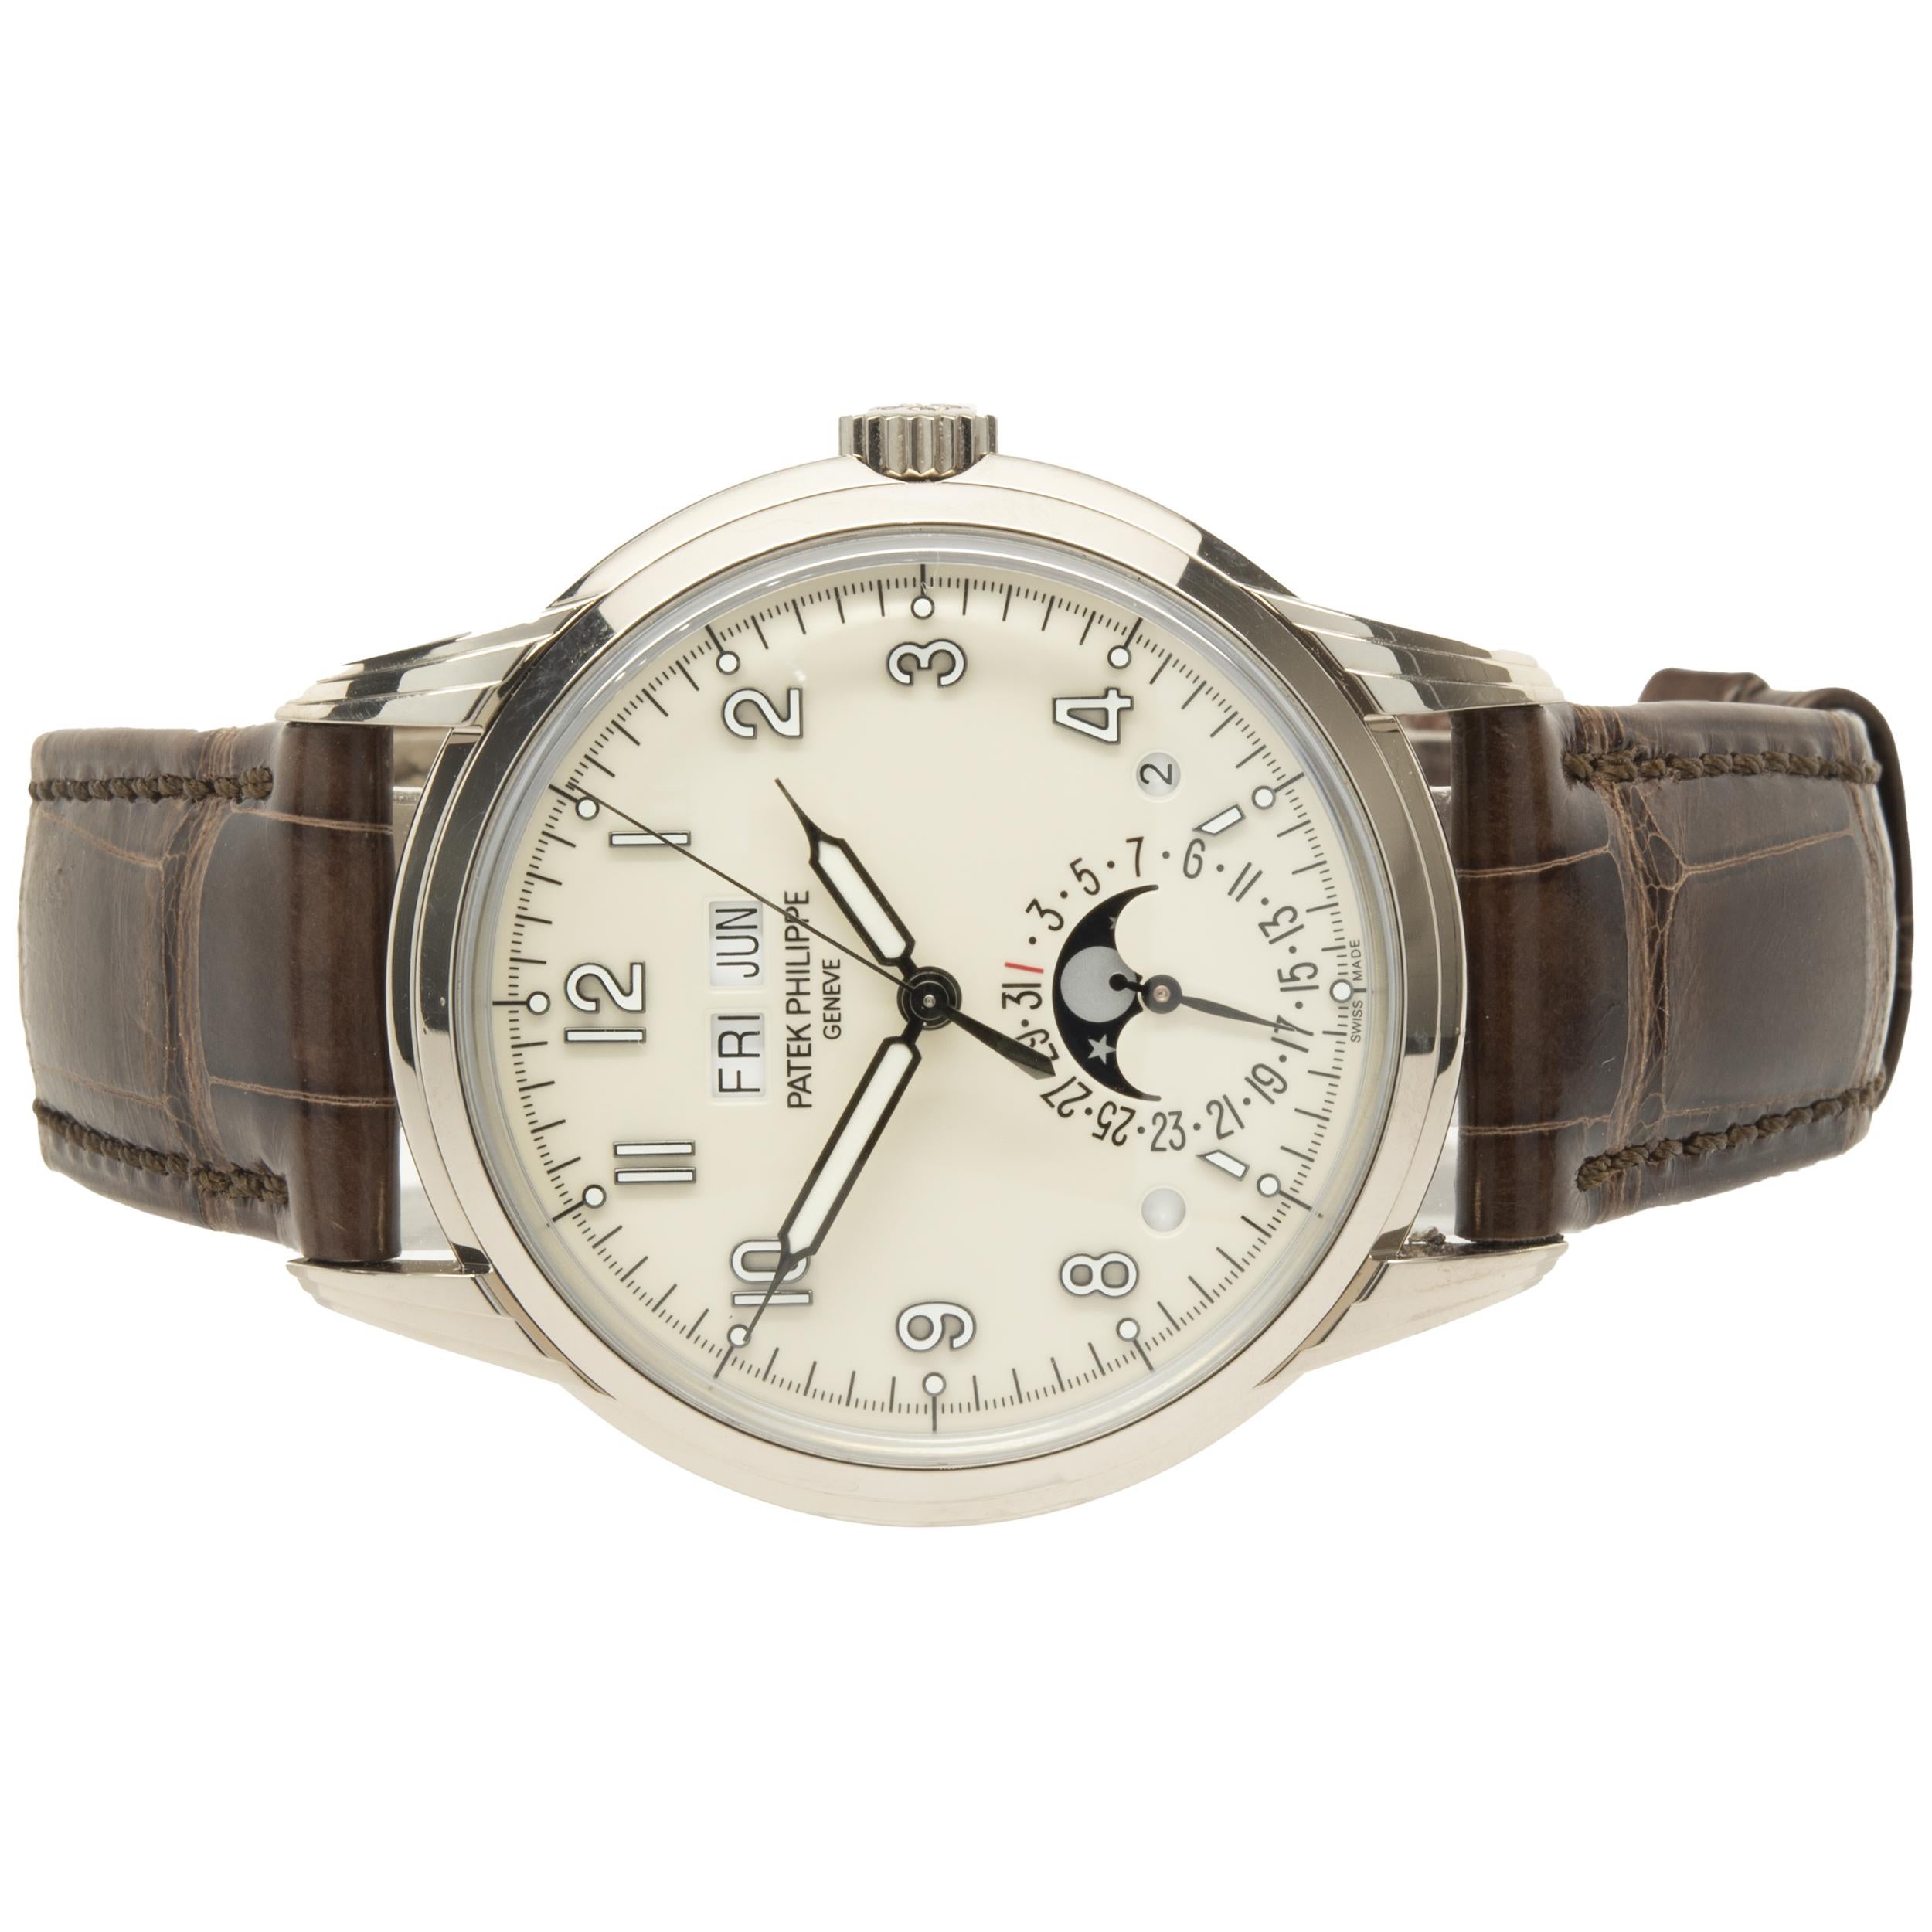 Movement: automatic
Function: hours, minutes, seconds, day, date, month, leap year, day/night indicator, moon phase
Case: 40mm 18K white gold round case, smooth bezel, sapphire crystal, push pull crown
Band: 18K white gold brown leather Patek